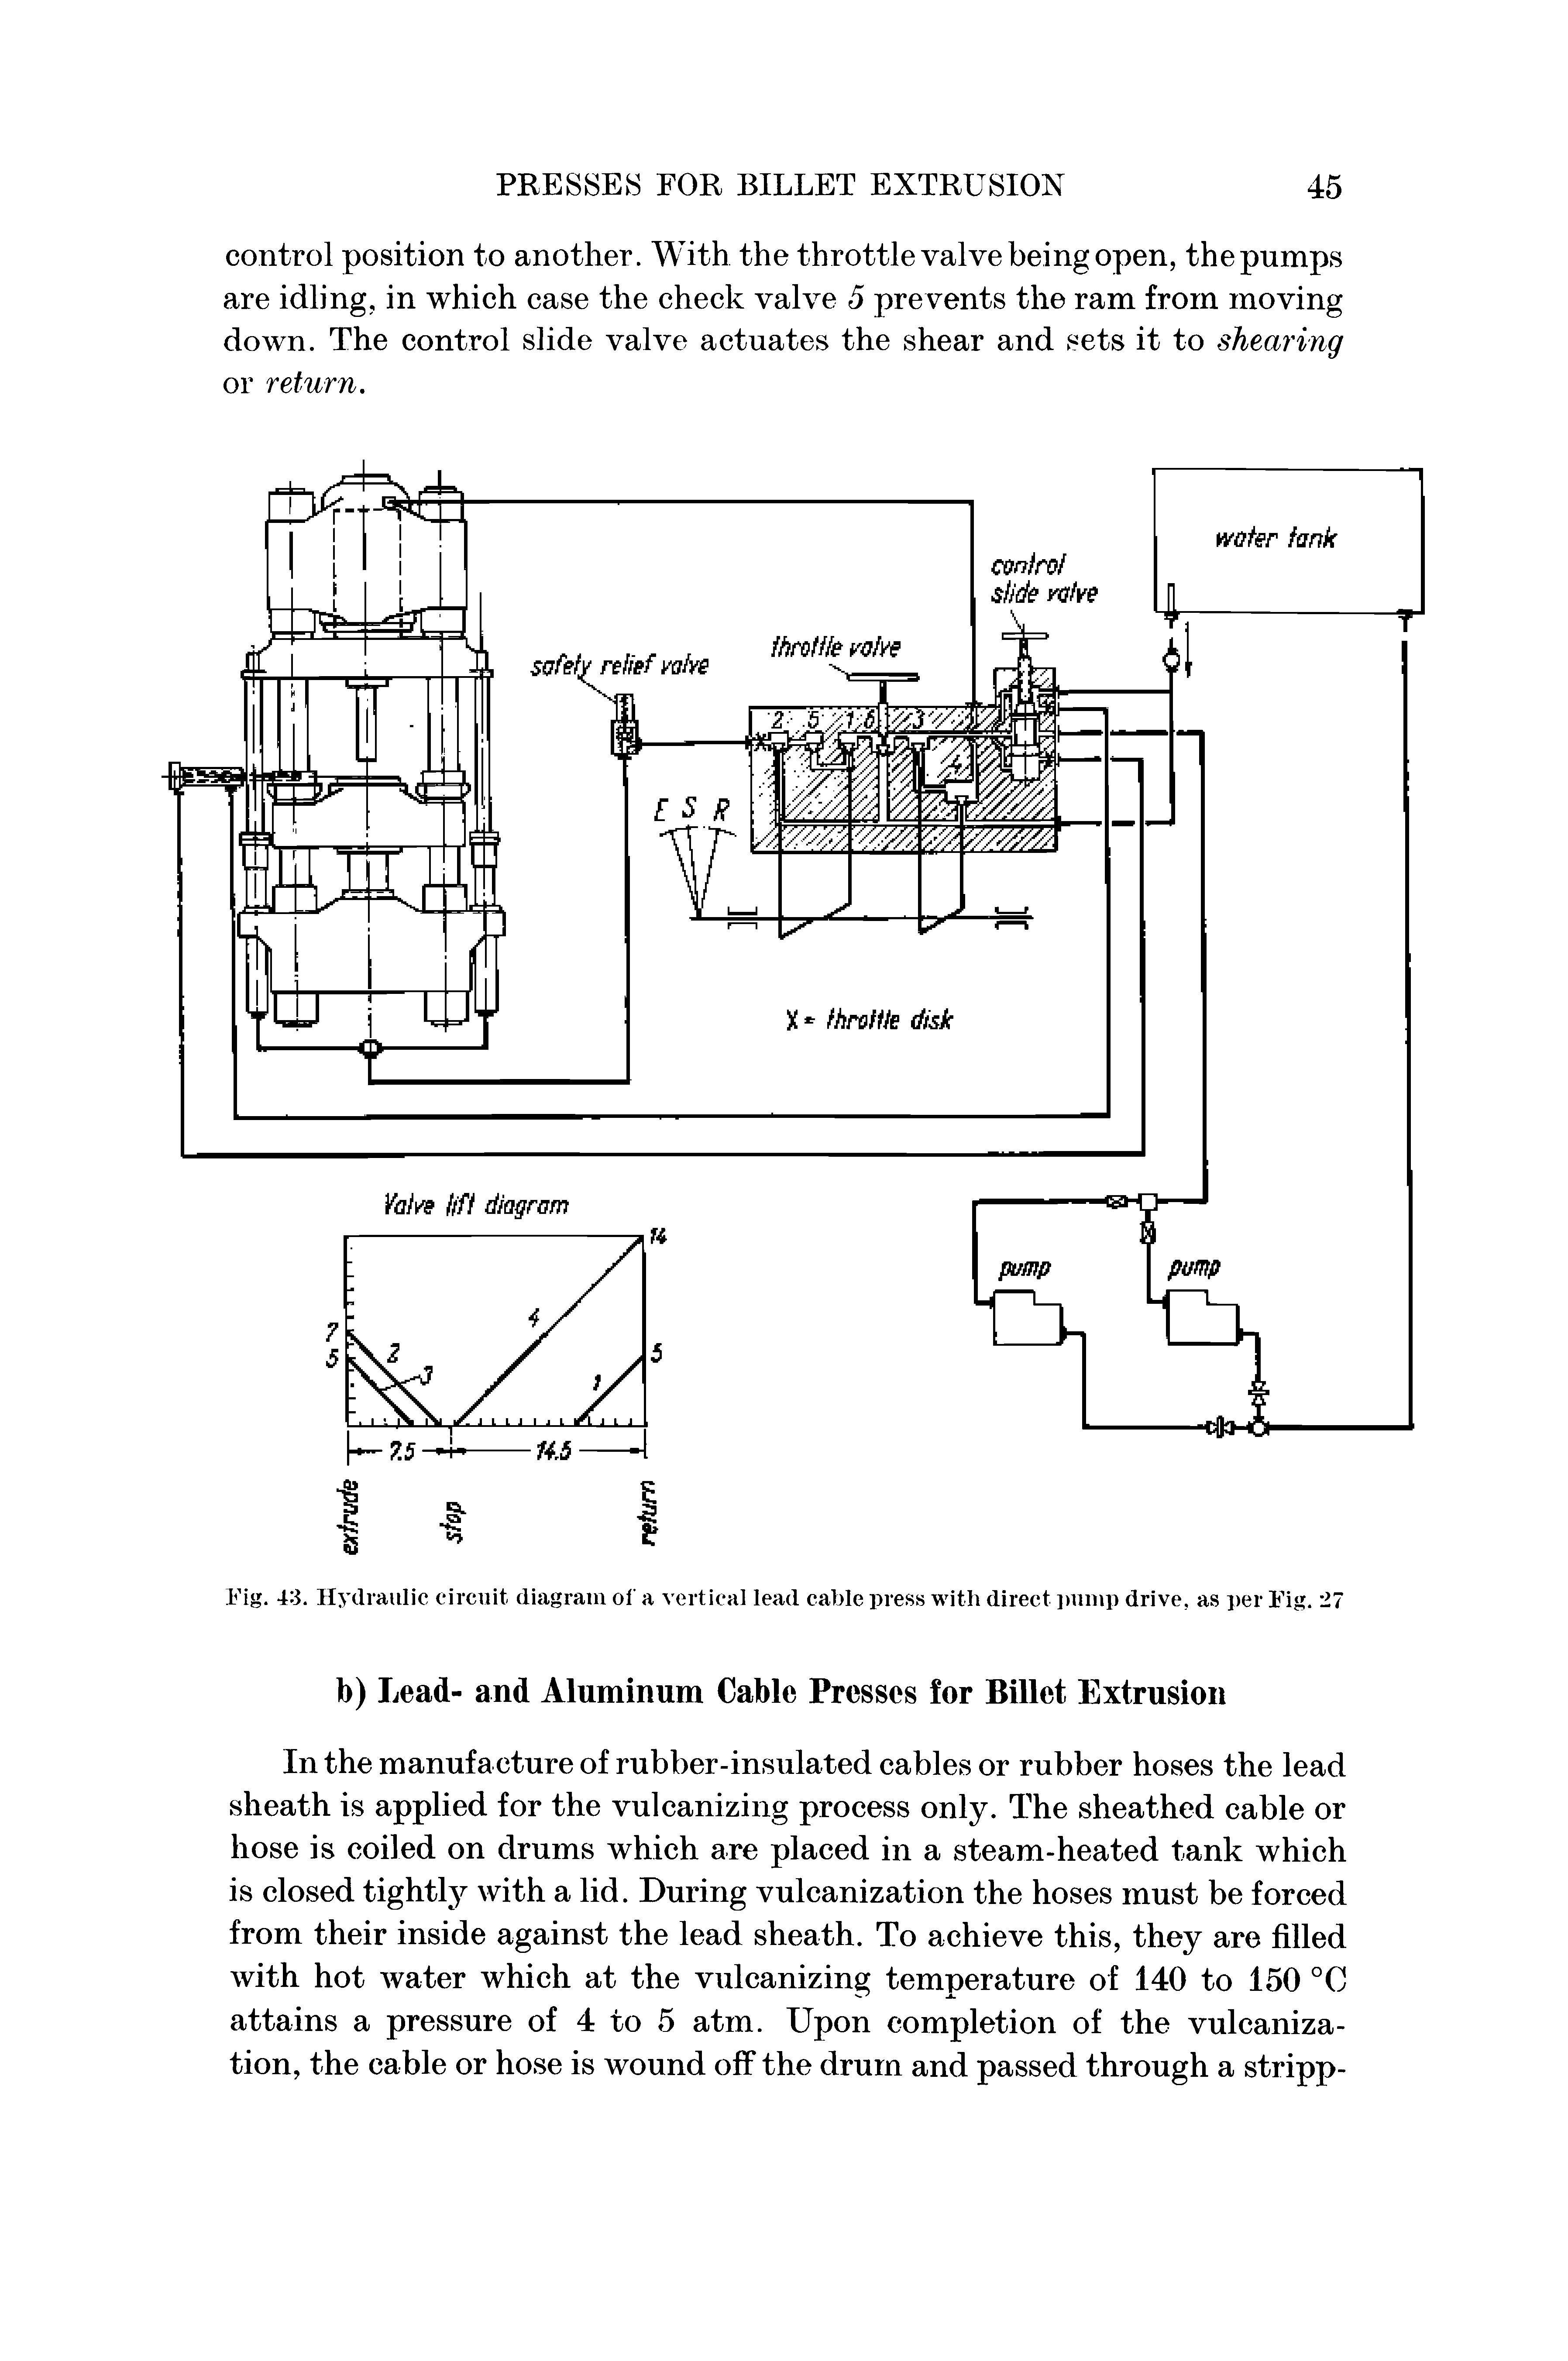 Fig. 43. Hydraulic circuit diagram ol a vertical lead cable press with direct jnimp drive, as per Fig. 27...